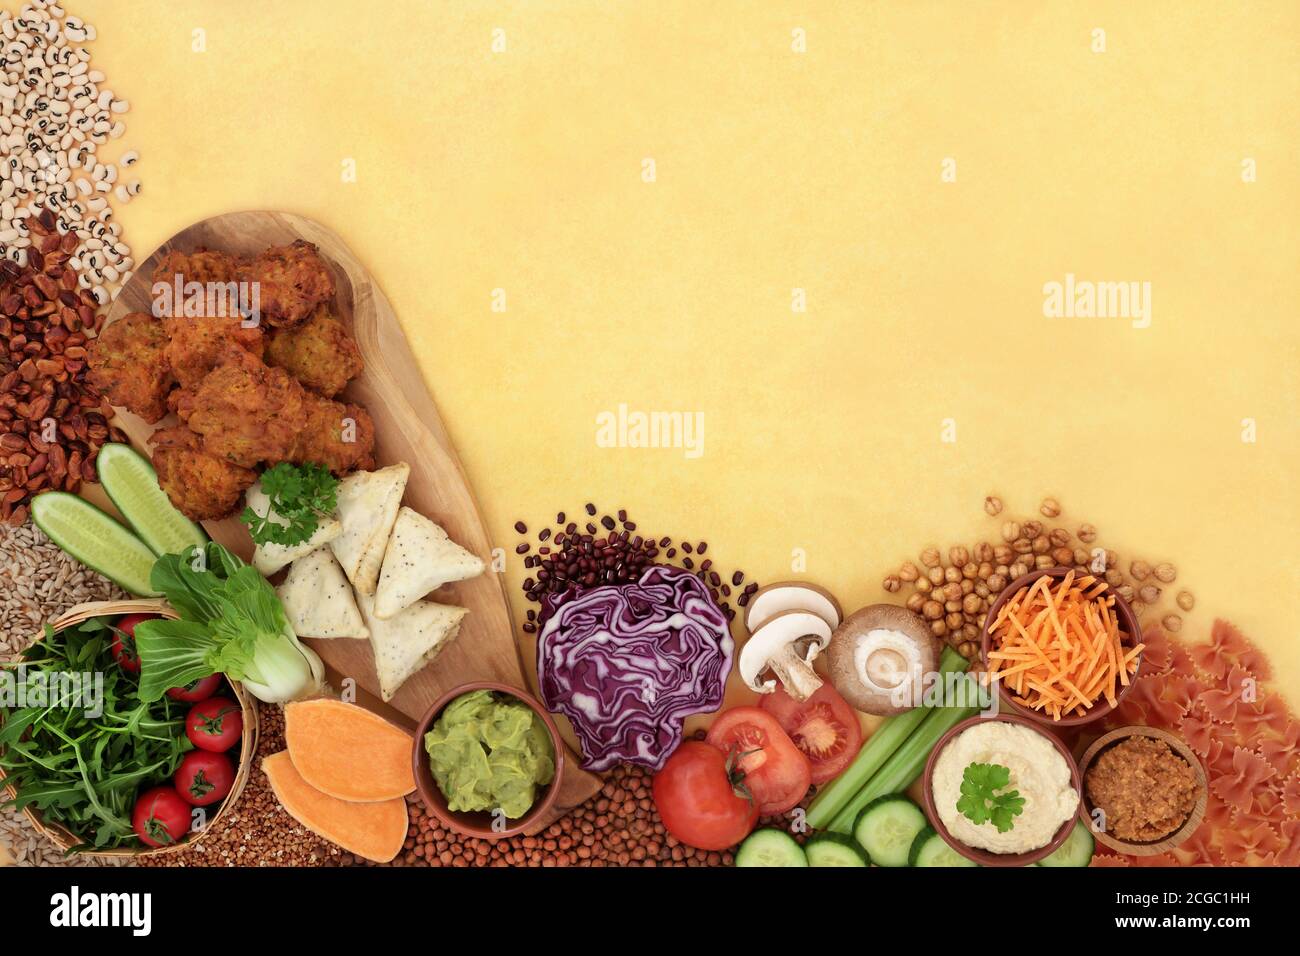 Plant based vegan food for a healthy diet with vegetables, fruit, pasta, samosas, bajis, legumes & dips. Stock Photo